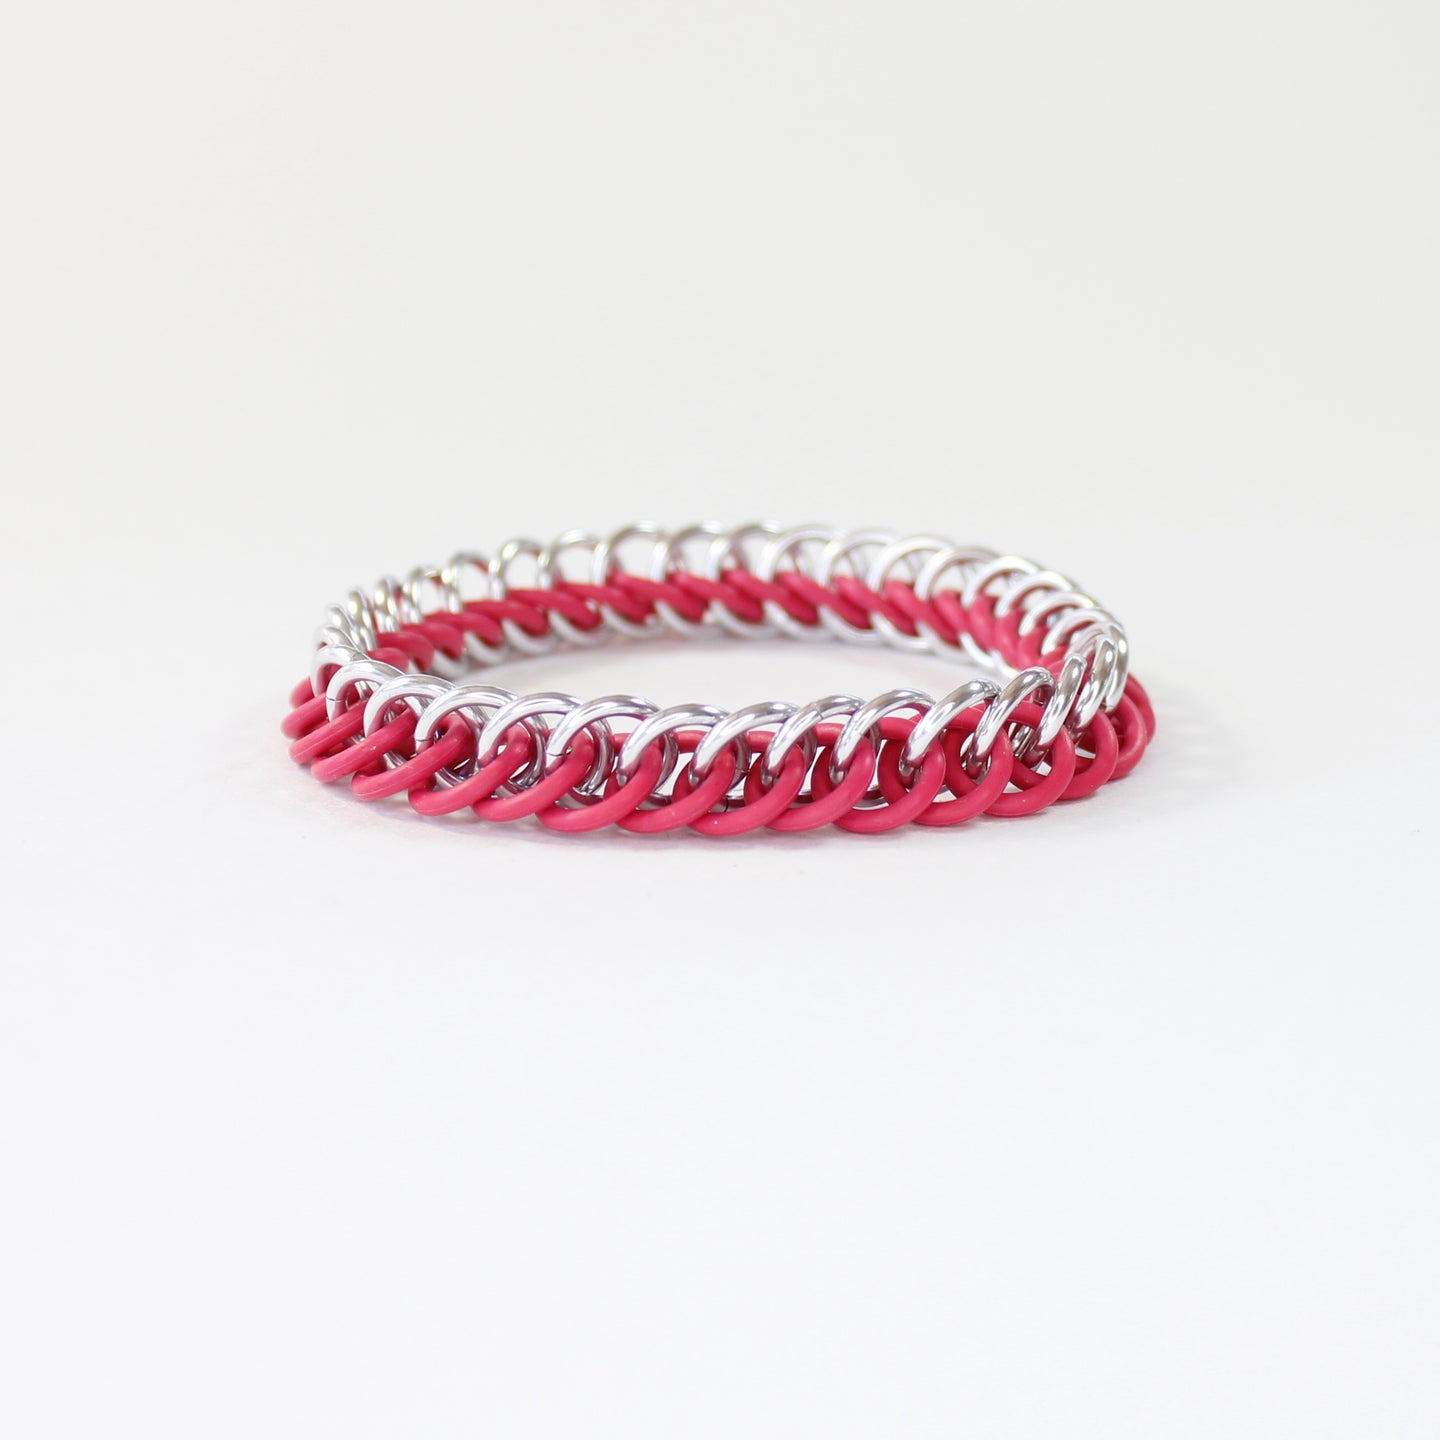 The Persian Stretch Bracelet in Hot Pink + Silver